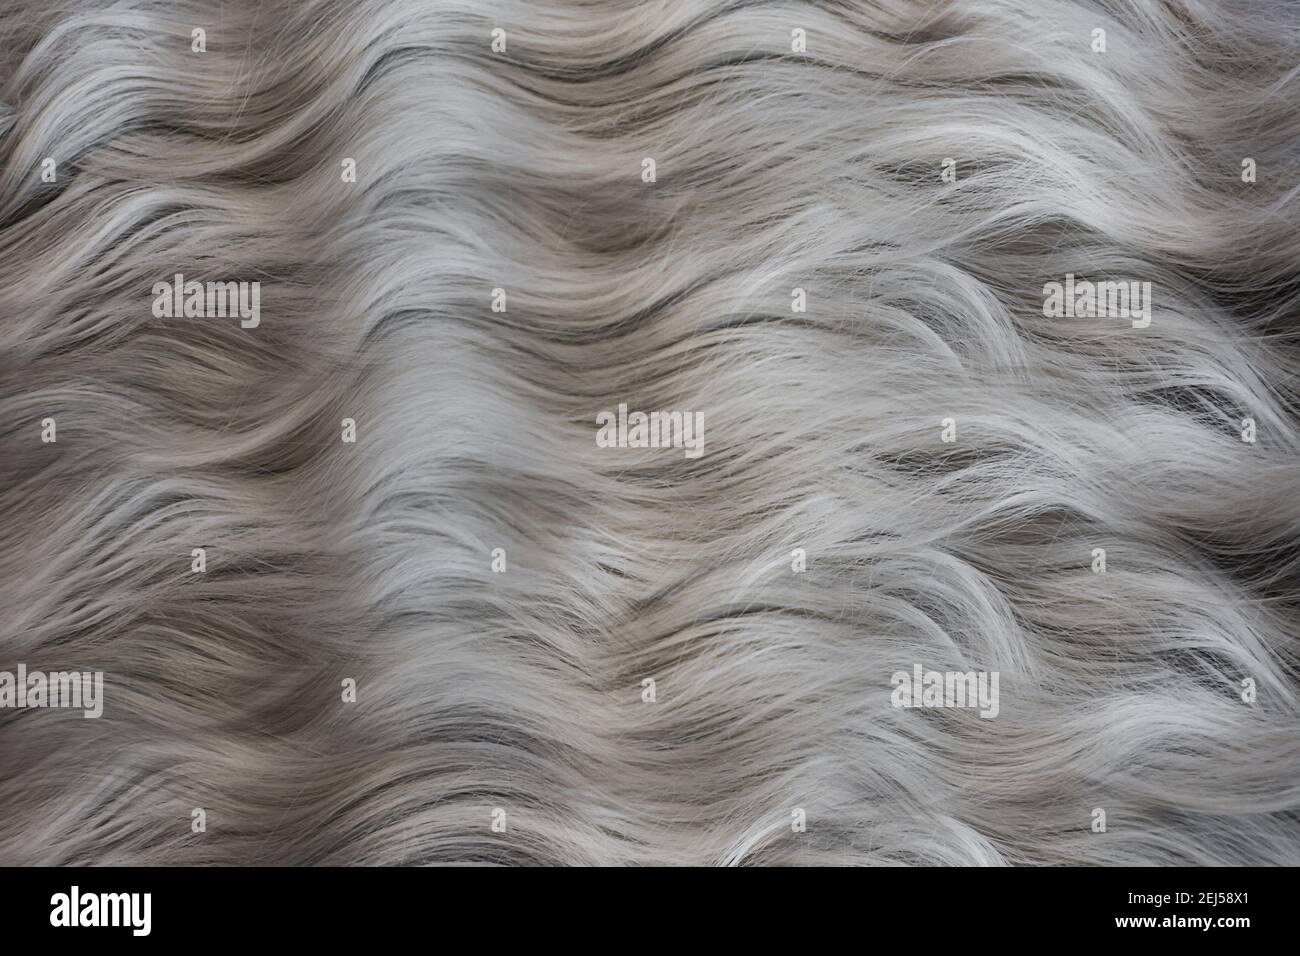 Blonde wavy hair texture as background Stock Photo